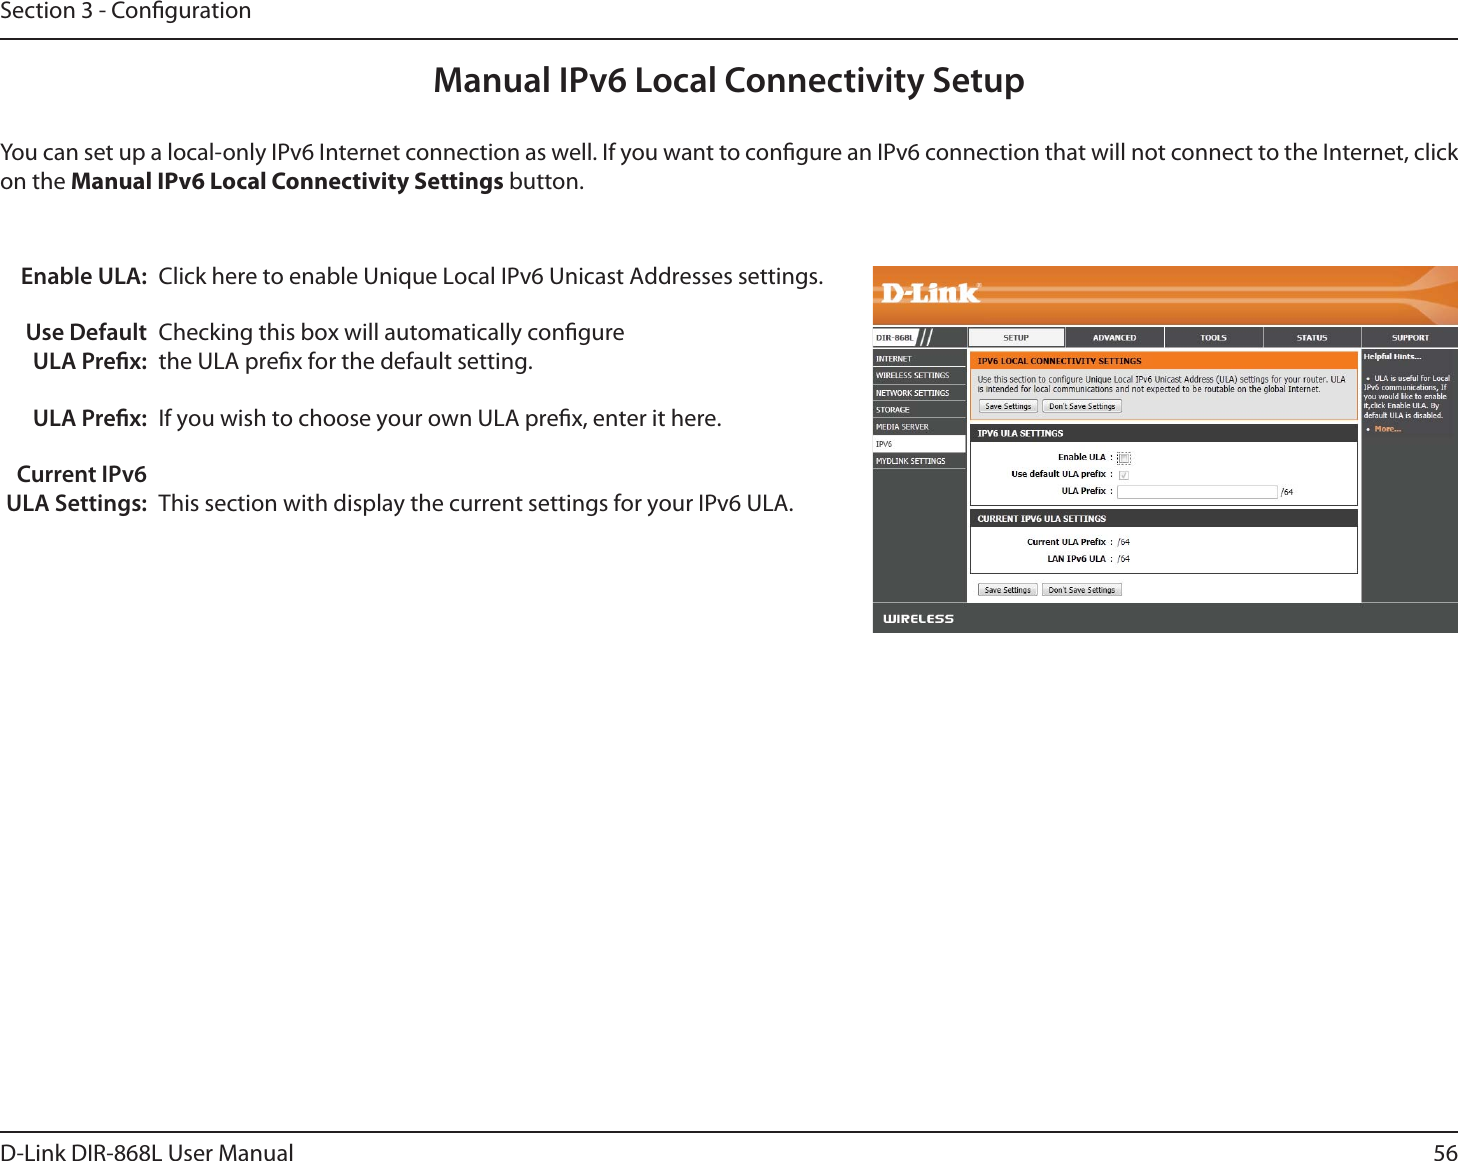 56D-Link DIR-868L User ManualSection 3 - CongurationManual IPv6 Local Connectivity SetupYou can set up a local-only IPv6 Internet connection as well. If you want to congure an IPv6 connection that will not connect to the Internet, click on the Manual IPv6 Local Connectivity Settings button.Enable ULA:Use Default ULA Prex:ULA Prex:Current IPv6 ULA Settings:Click here to enable Unique Local IPv6 Unicast Addresses settings.Checking this box will automatically congure the ULA prex for the default setting.If you wish to choose your own ULA prex, enter it here.This section with display the current settings for your IPv6 ULA.